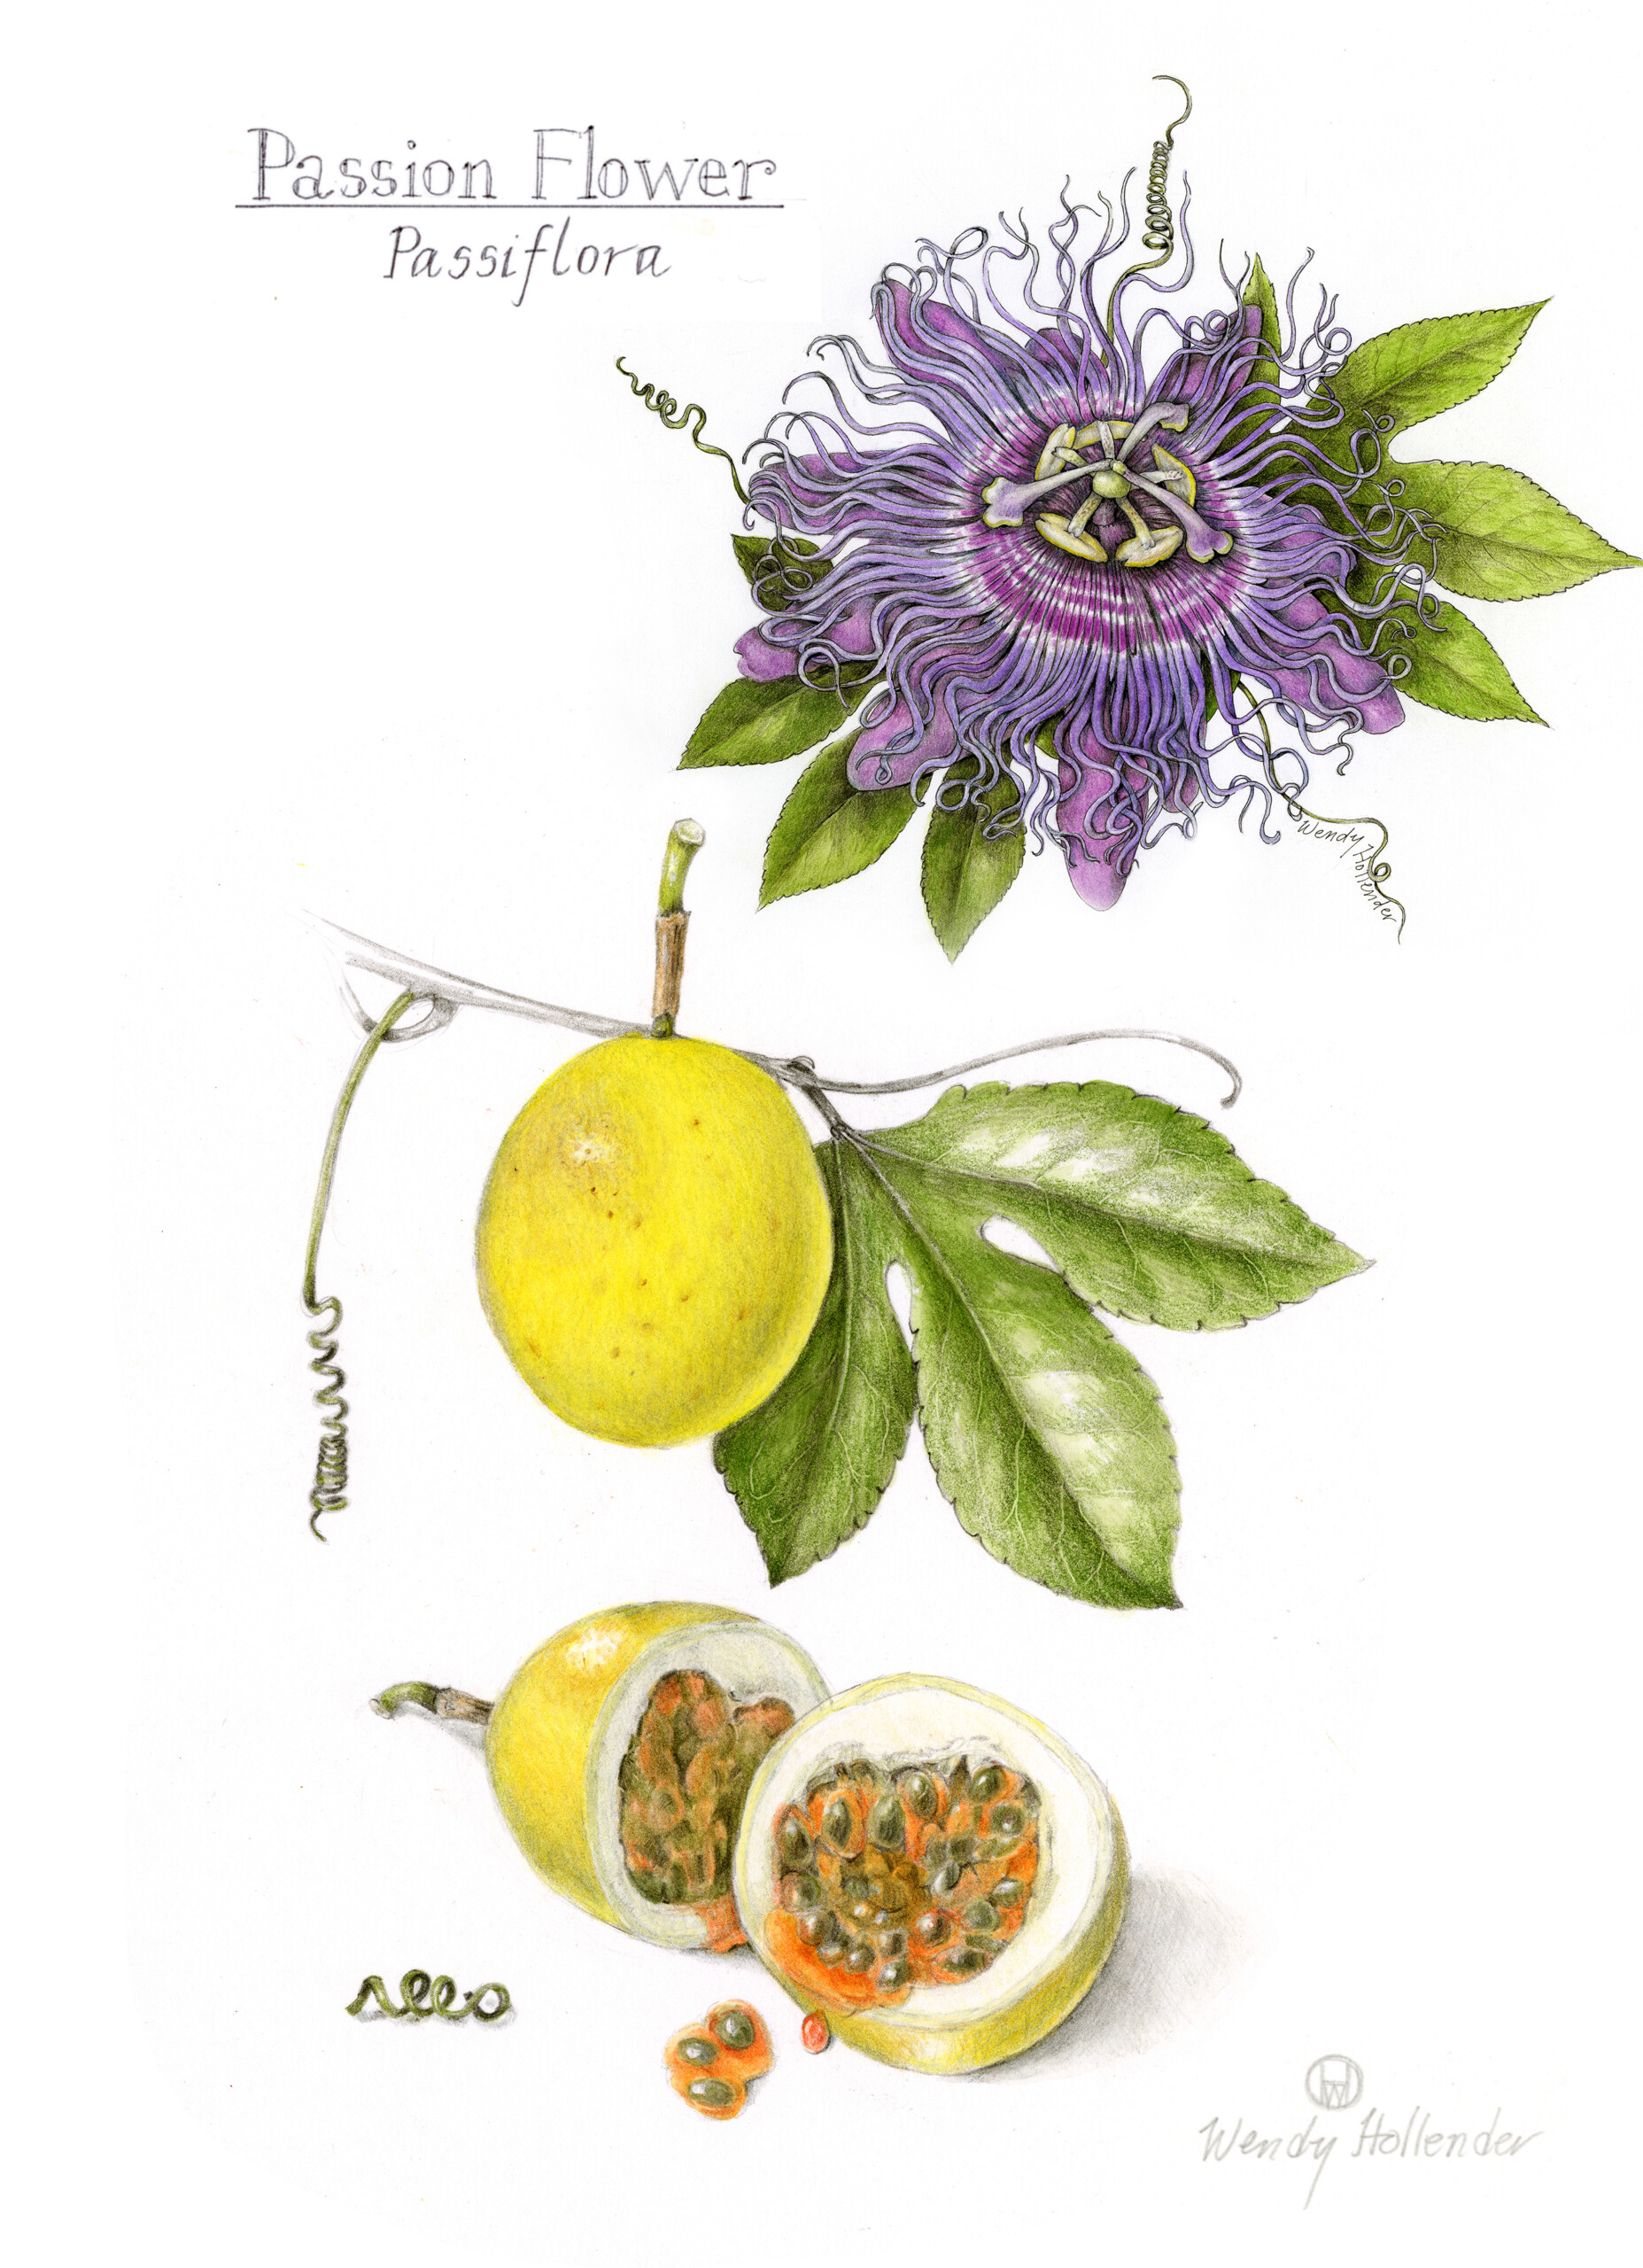 Purple passion flower with leaves (top), passion fruit whole with leaf (middle), passion fruit open with seeds inside (bottom)